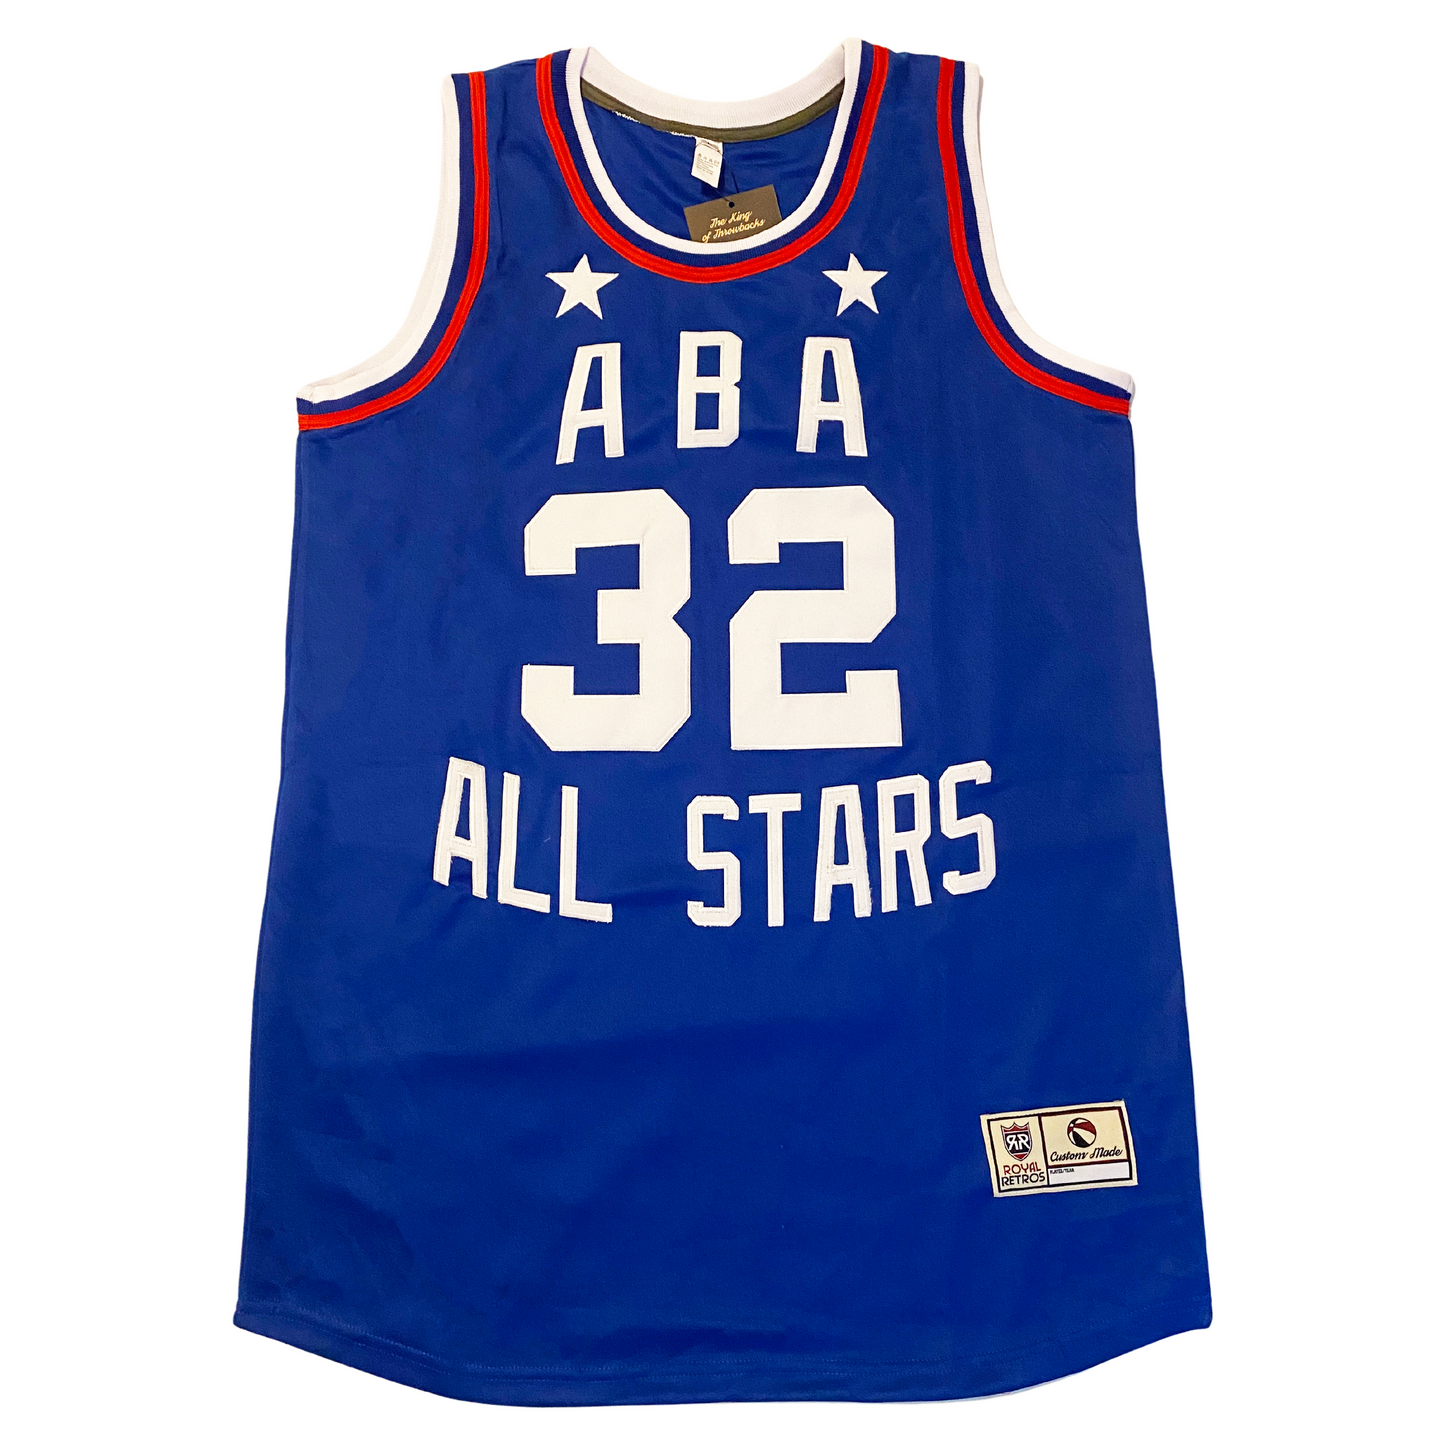 ABA All Star Jersey